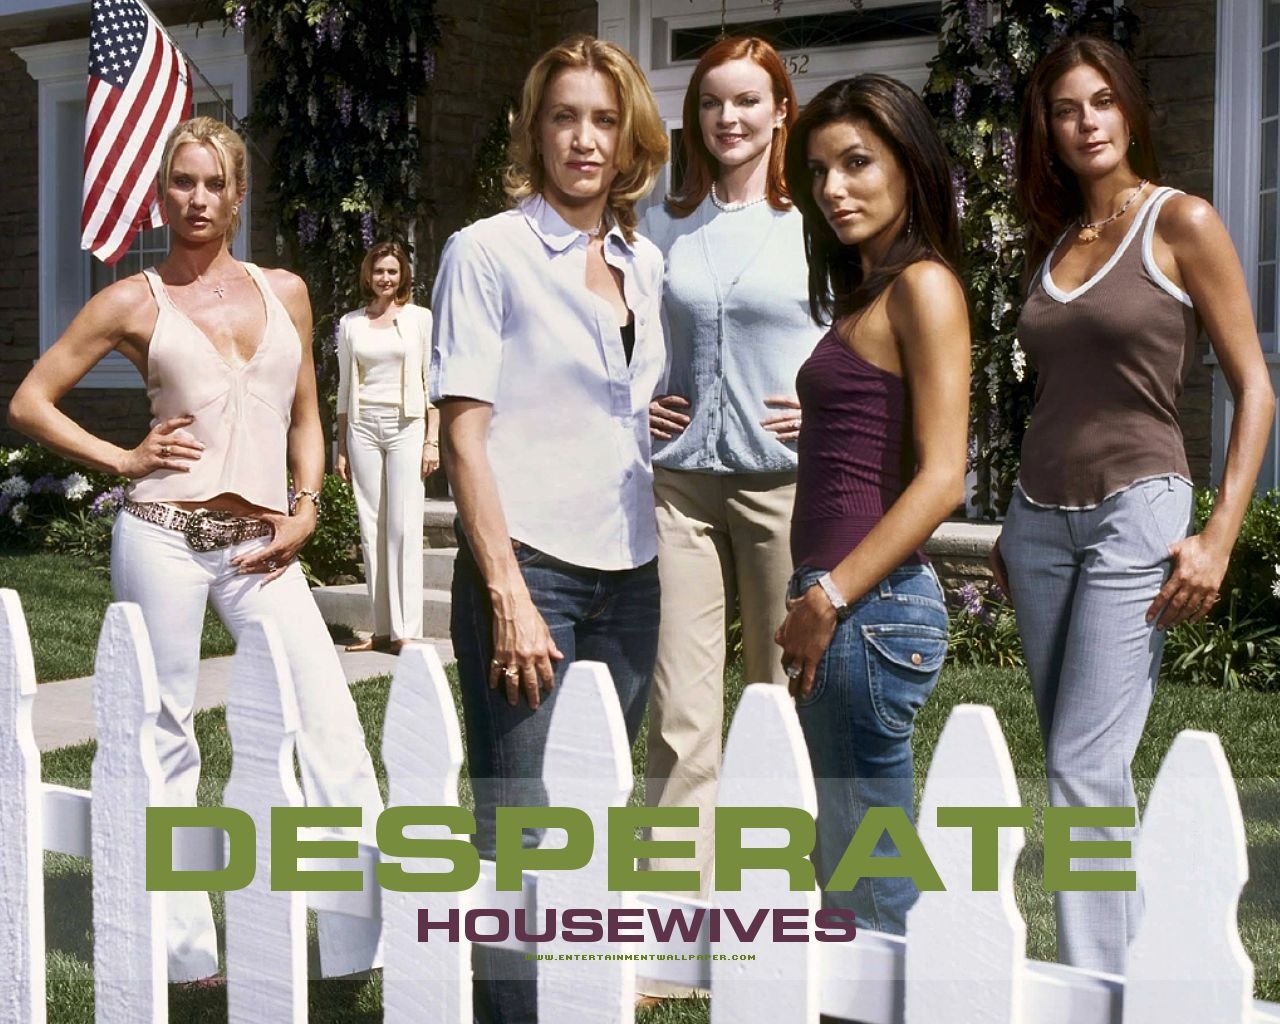 Desperate Housewives 絕望的主婦 #23 - 1280x1024